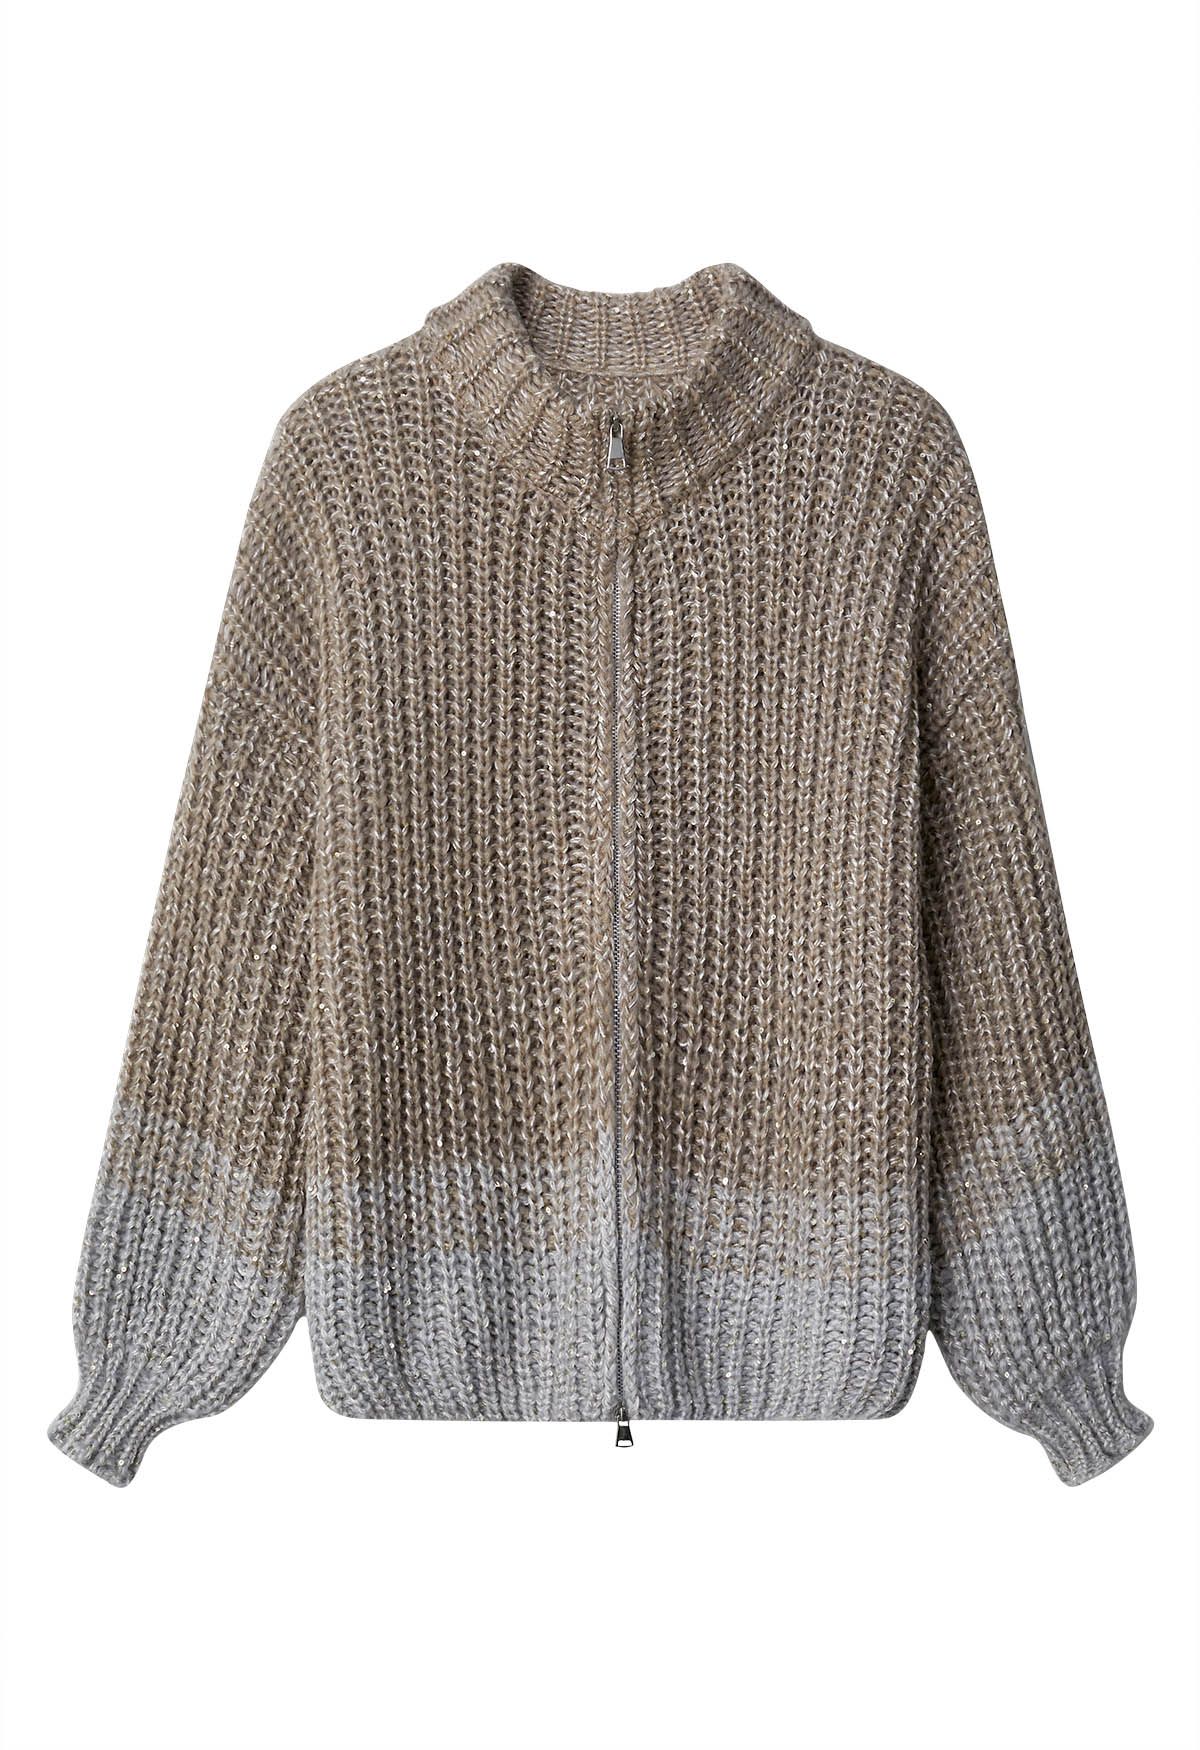 Two-Tone Sequin Chunky Knit Zip Up Cardigan in Khaki